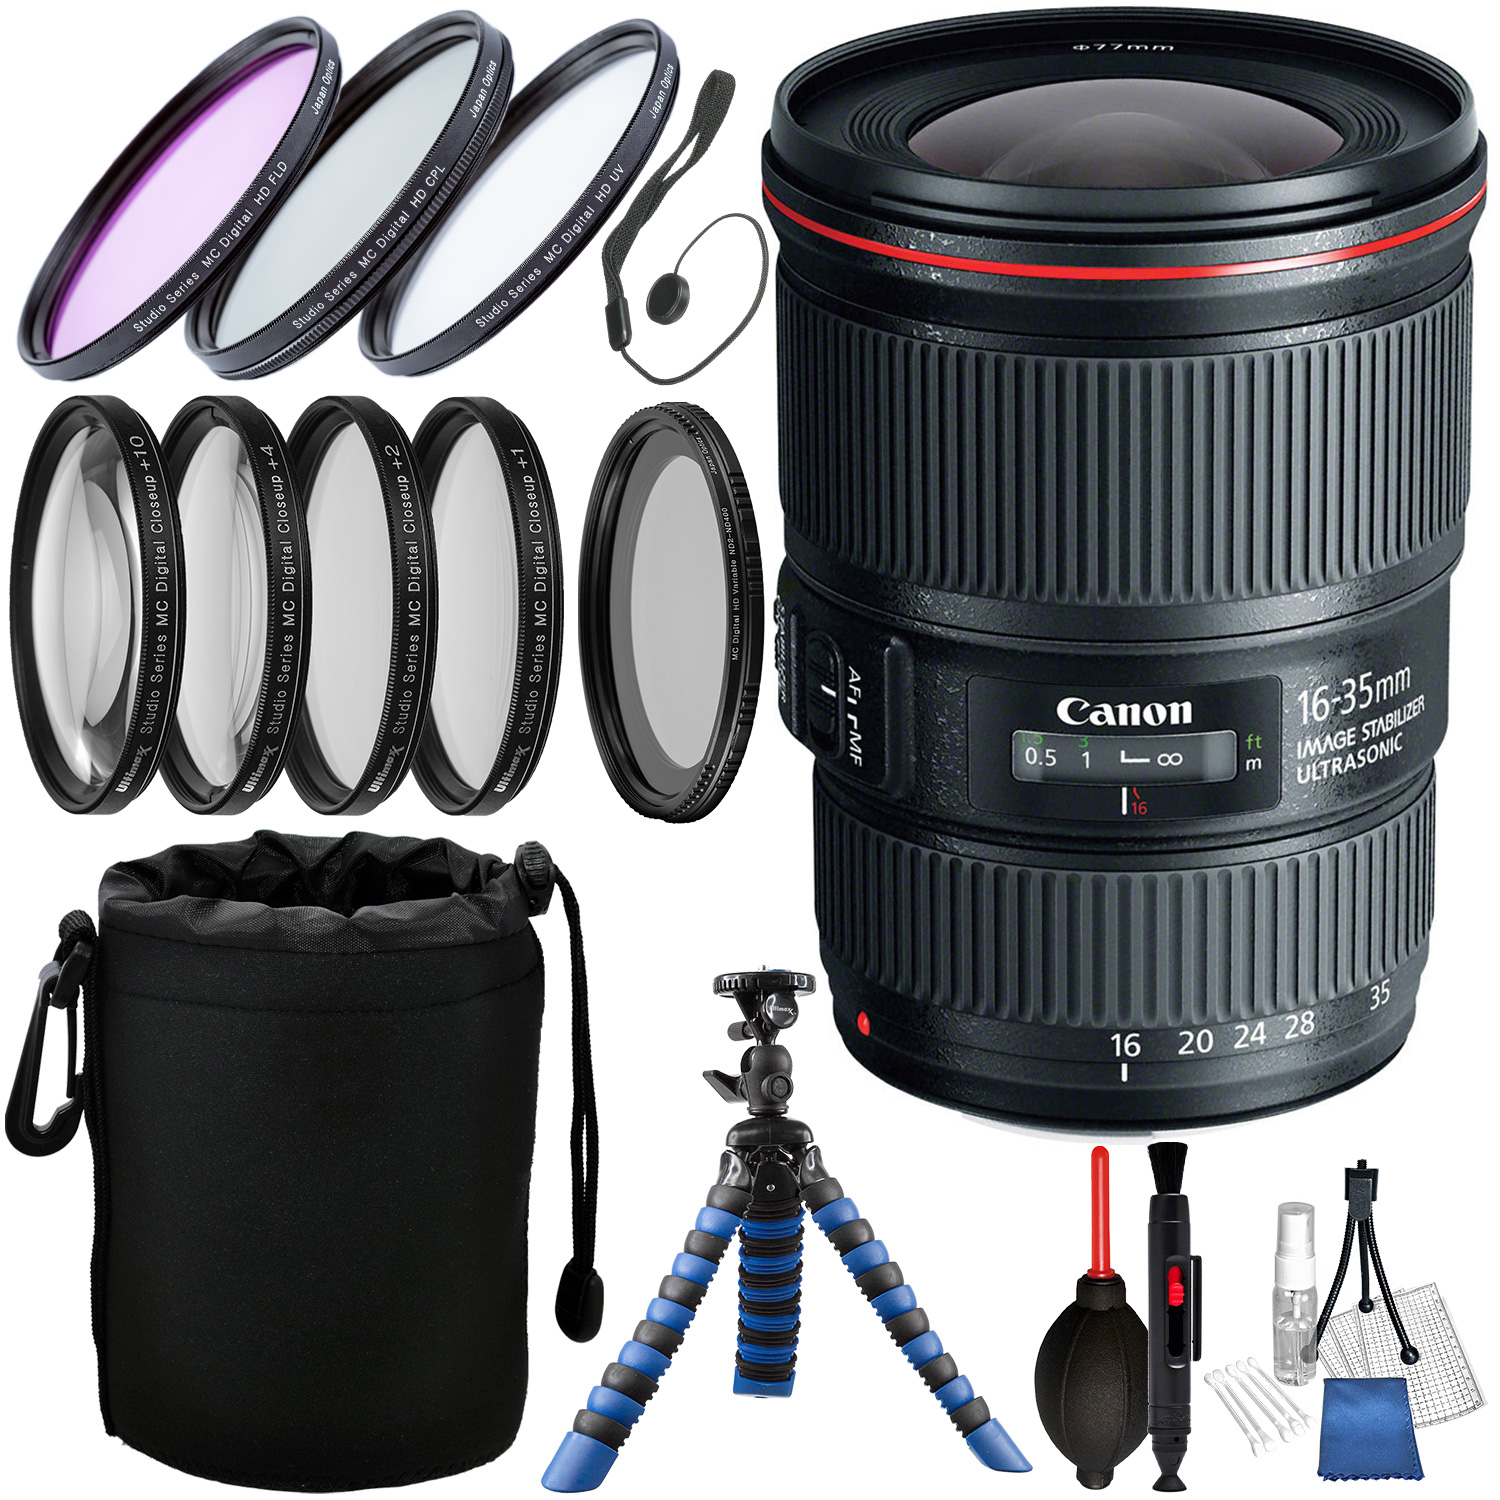 Canon EF 16-35mm f/4L IS USM Lens with Accessory Bundle